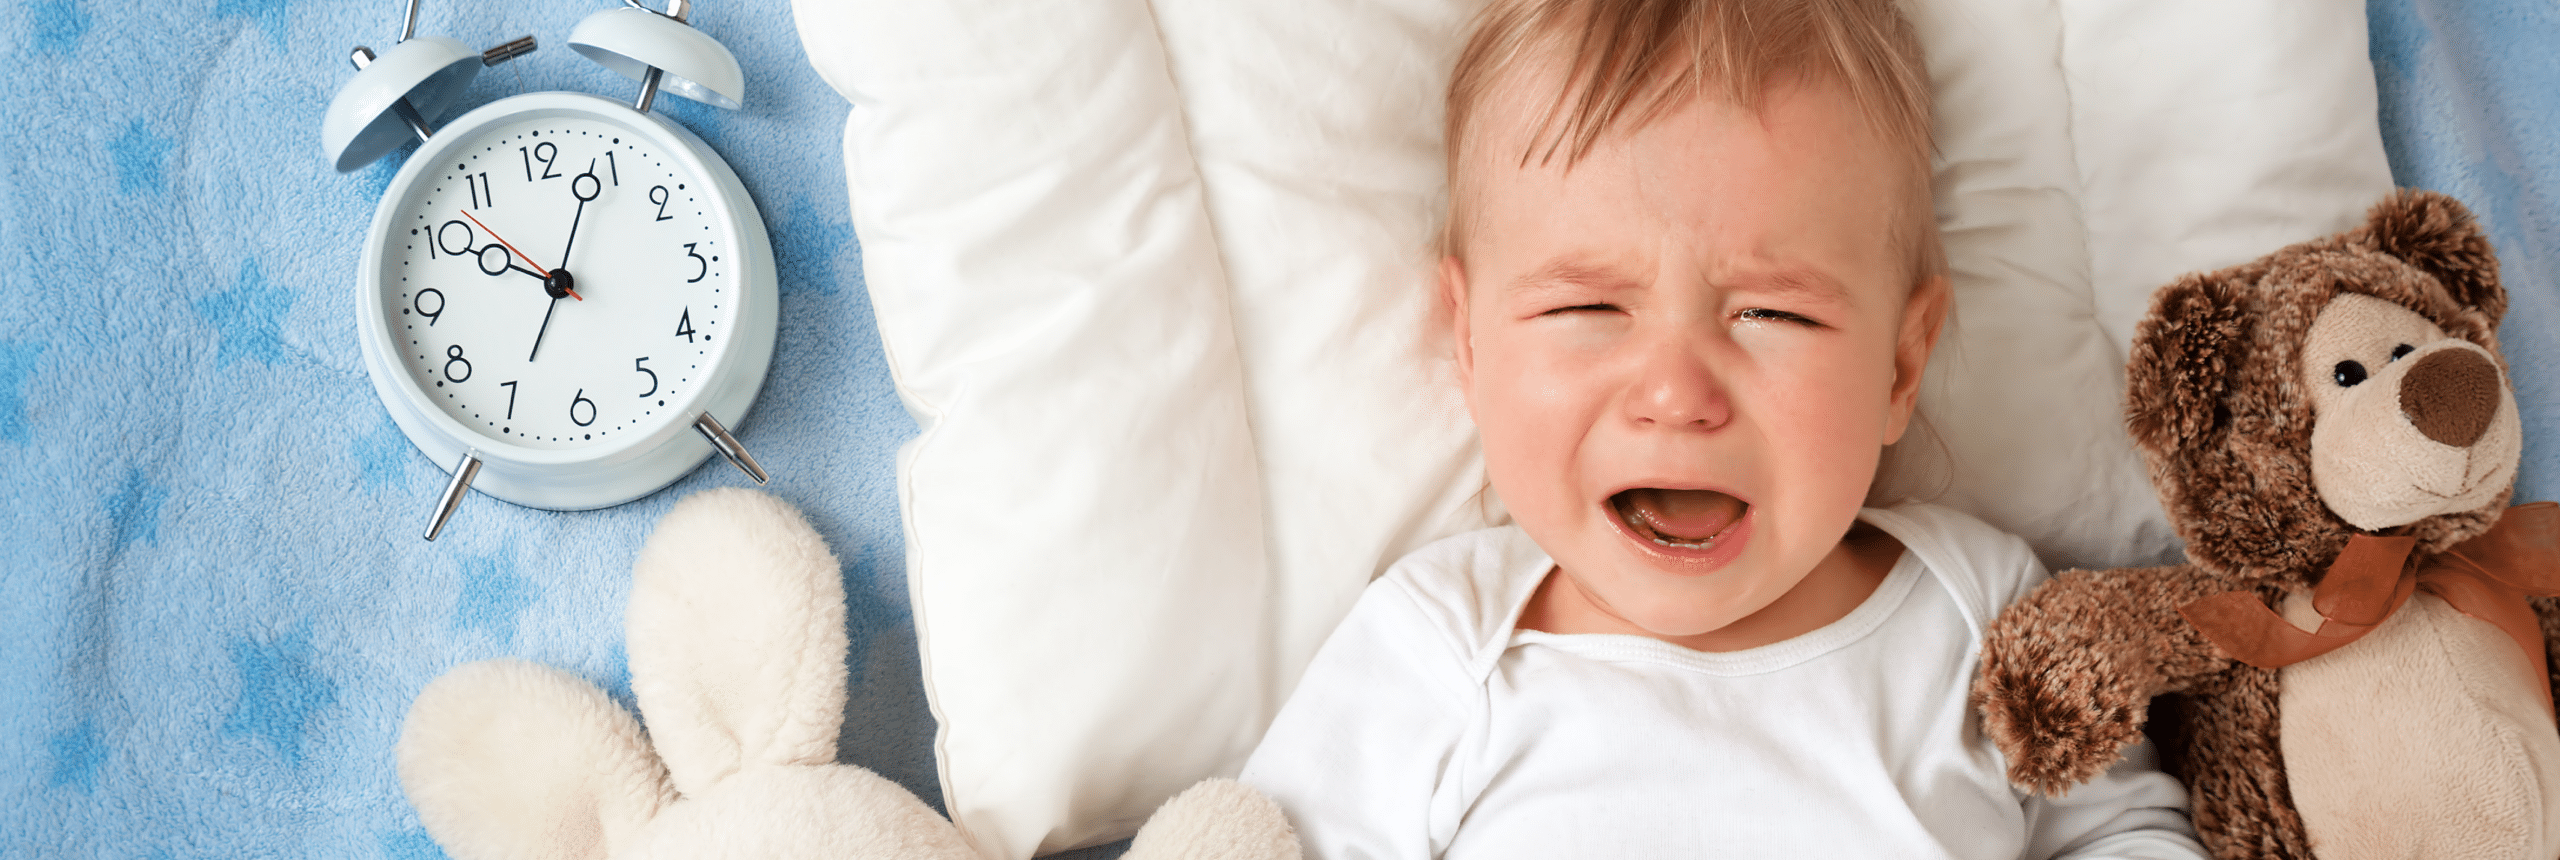 Facing Night Terrors, Your Little One’s Bad Dreams